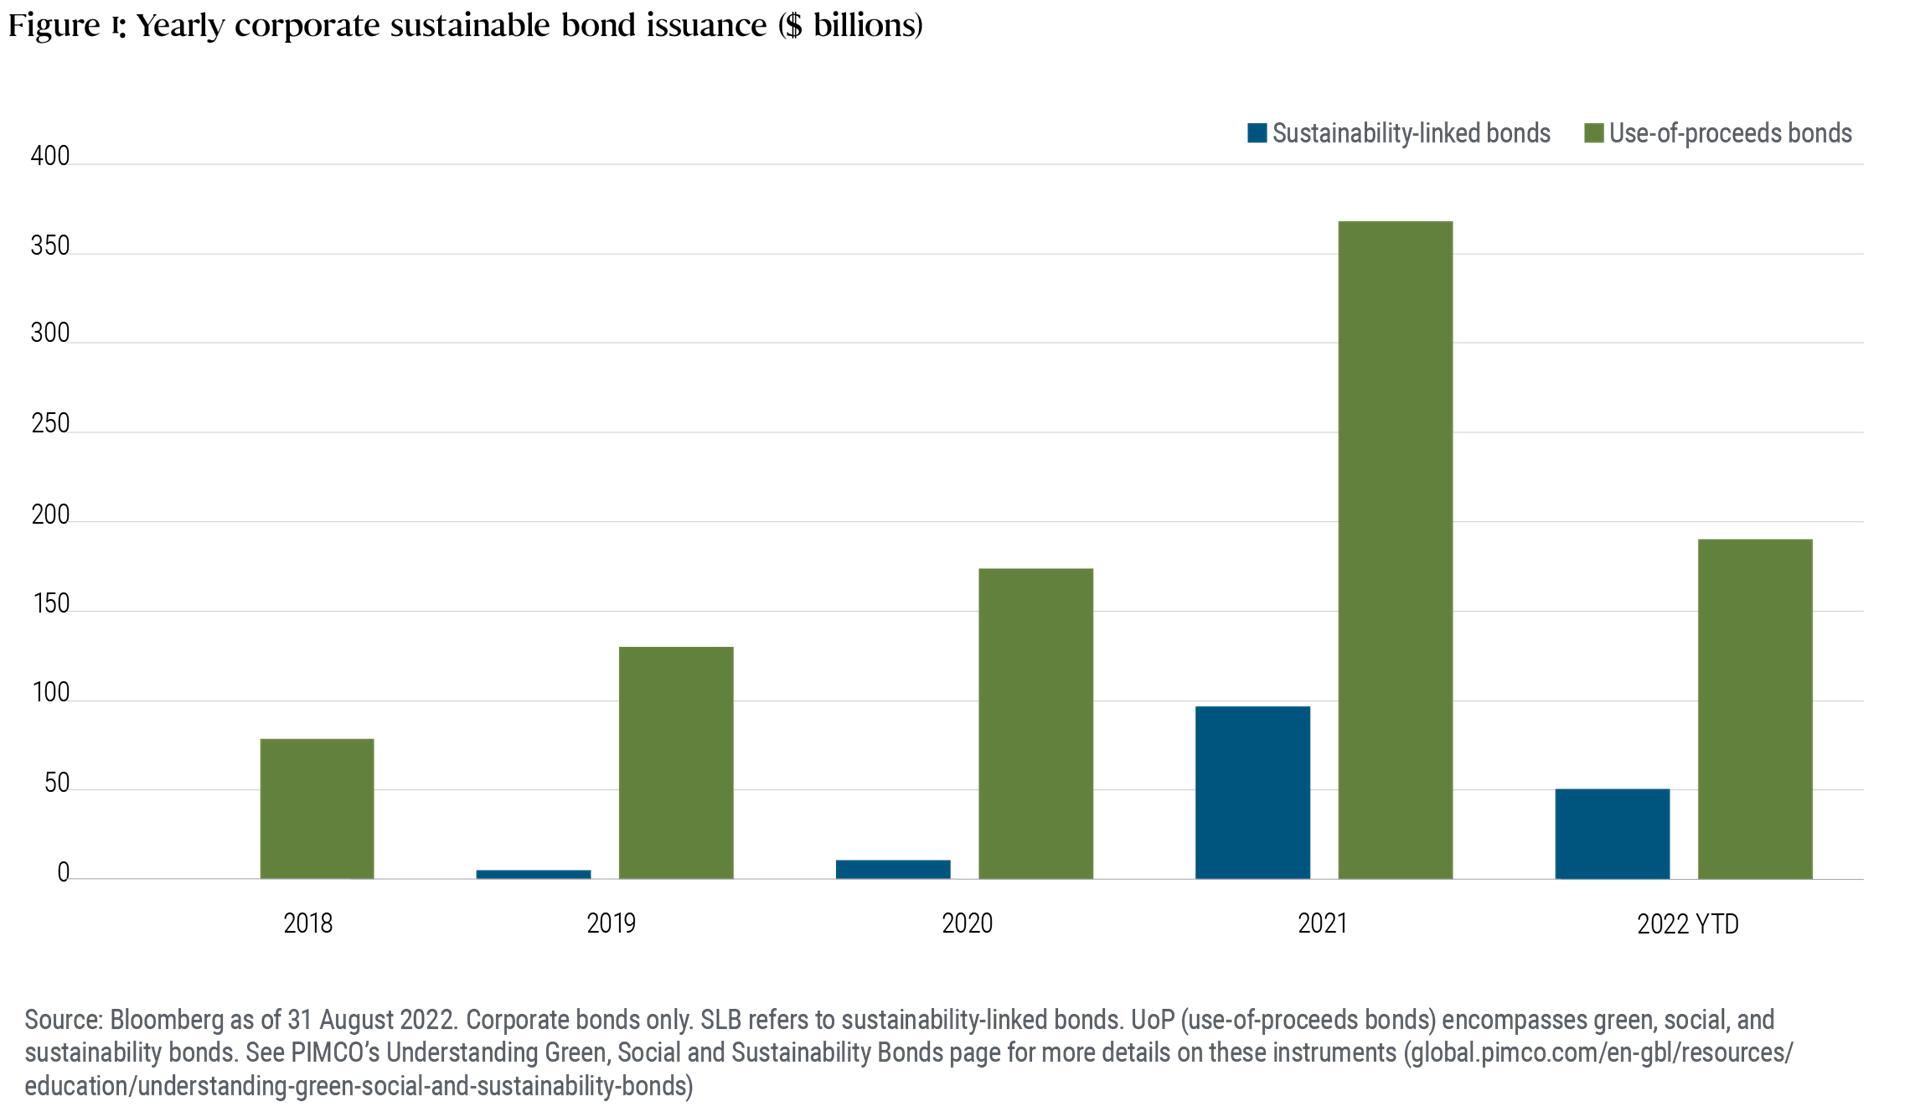 Figure 1 is a bar chart showing yearly issuance of corporate sustainability-linked bonds and corporate use-of-proceeds bonds from 2018 through August 2022. Issuance of corporate sustainability-linked bonds has risen from zero in 2018 to $5 billion in 2019, $11 billion in 2020, and $97 billion in 2021. Through 31 August of this year, issuance totaled $51 billion. Issuance of corporate use-of-proceeds bonds has risen from $79 billion in 2018 to $130 billion in 2019, $174 billion in 2020, and $368 billion in 2021. Issuance through 31 August totaled $190 billion. Data provided by Bloomberg as of 31 August 2022. 